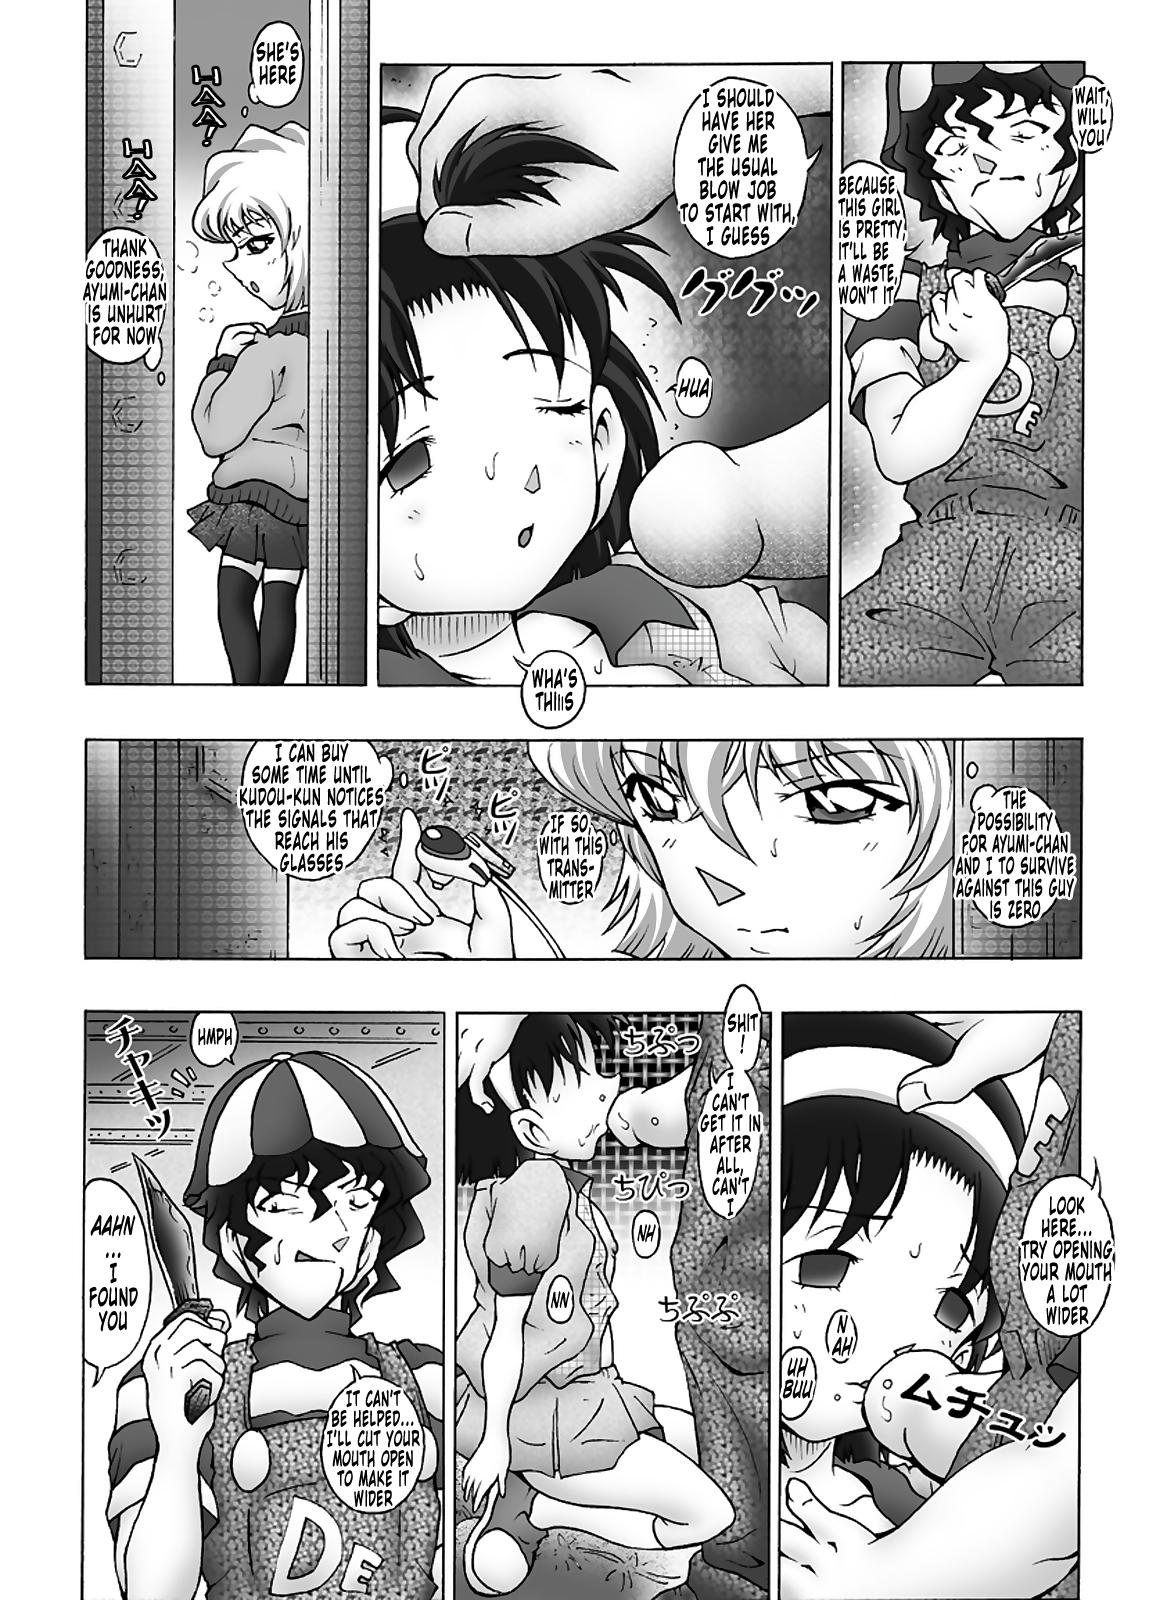 Web Bumbling Detective Conan - File 11: The Mystery Of Jack The Ripper's True Identity - Detective conan Step Dad - Page 7